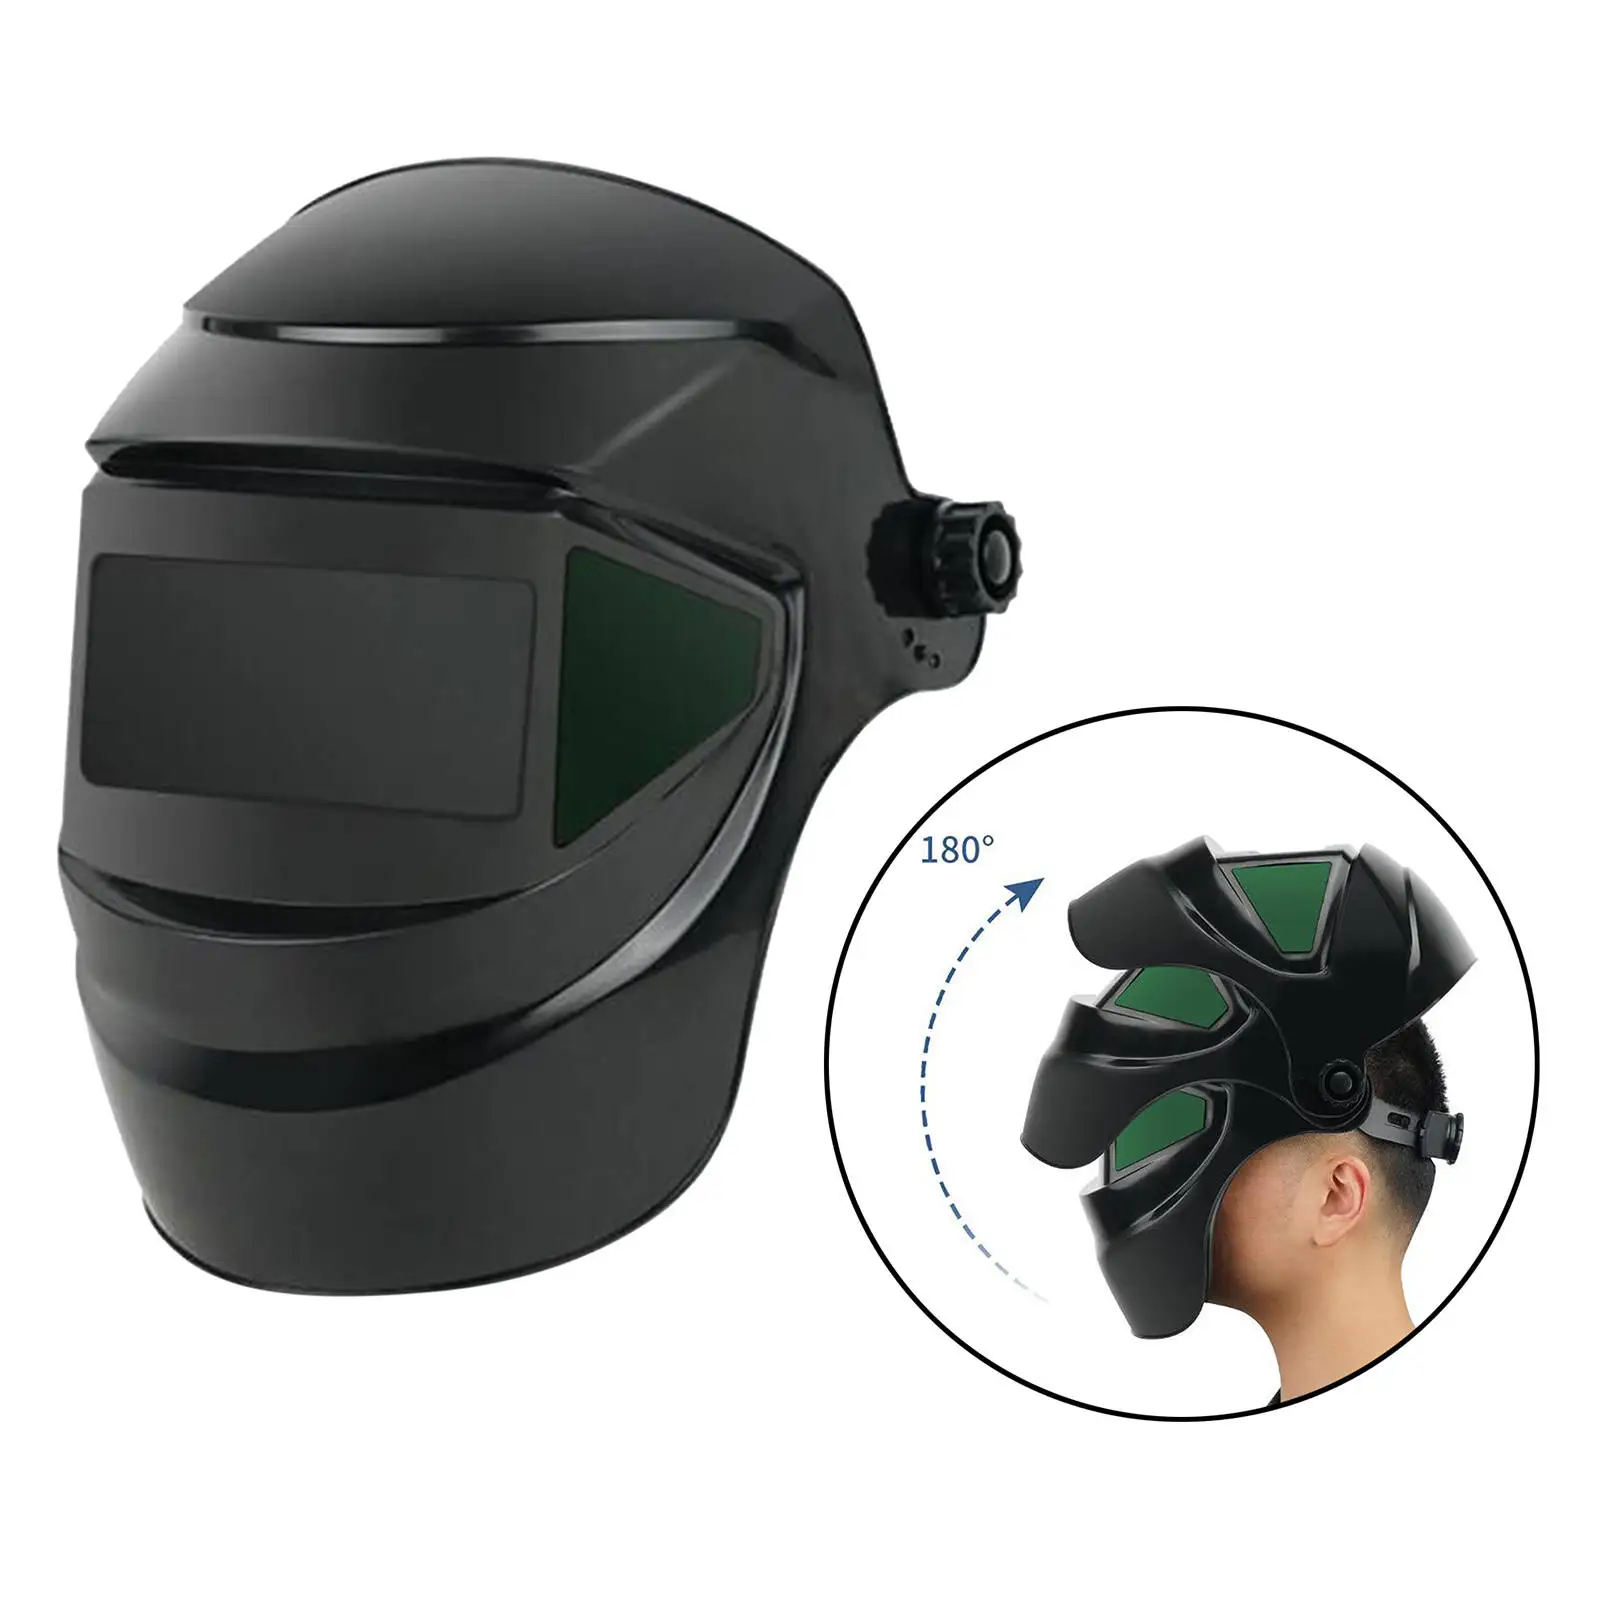 s Large View True Color Welding Helmet Mask   Shade Eyes Goggles Protector Power Grinding, Black